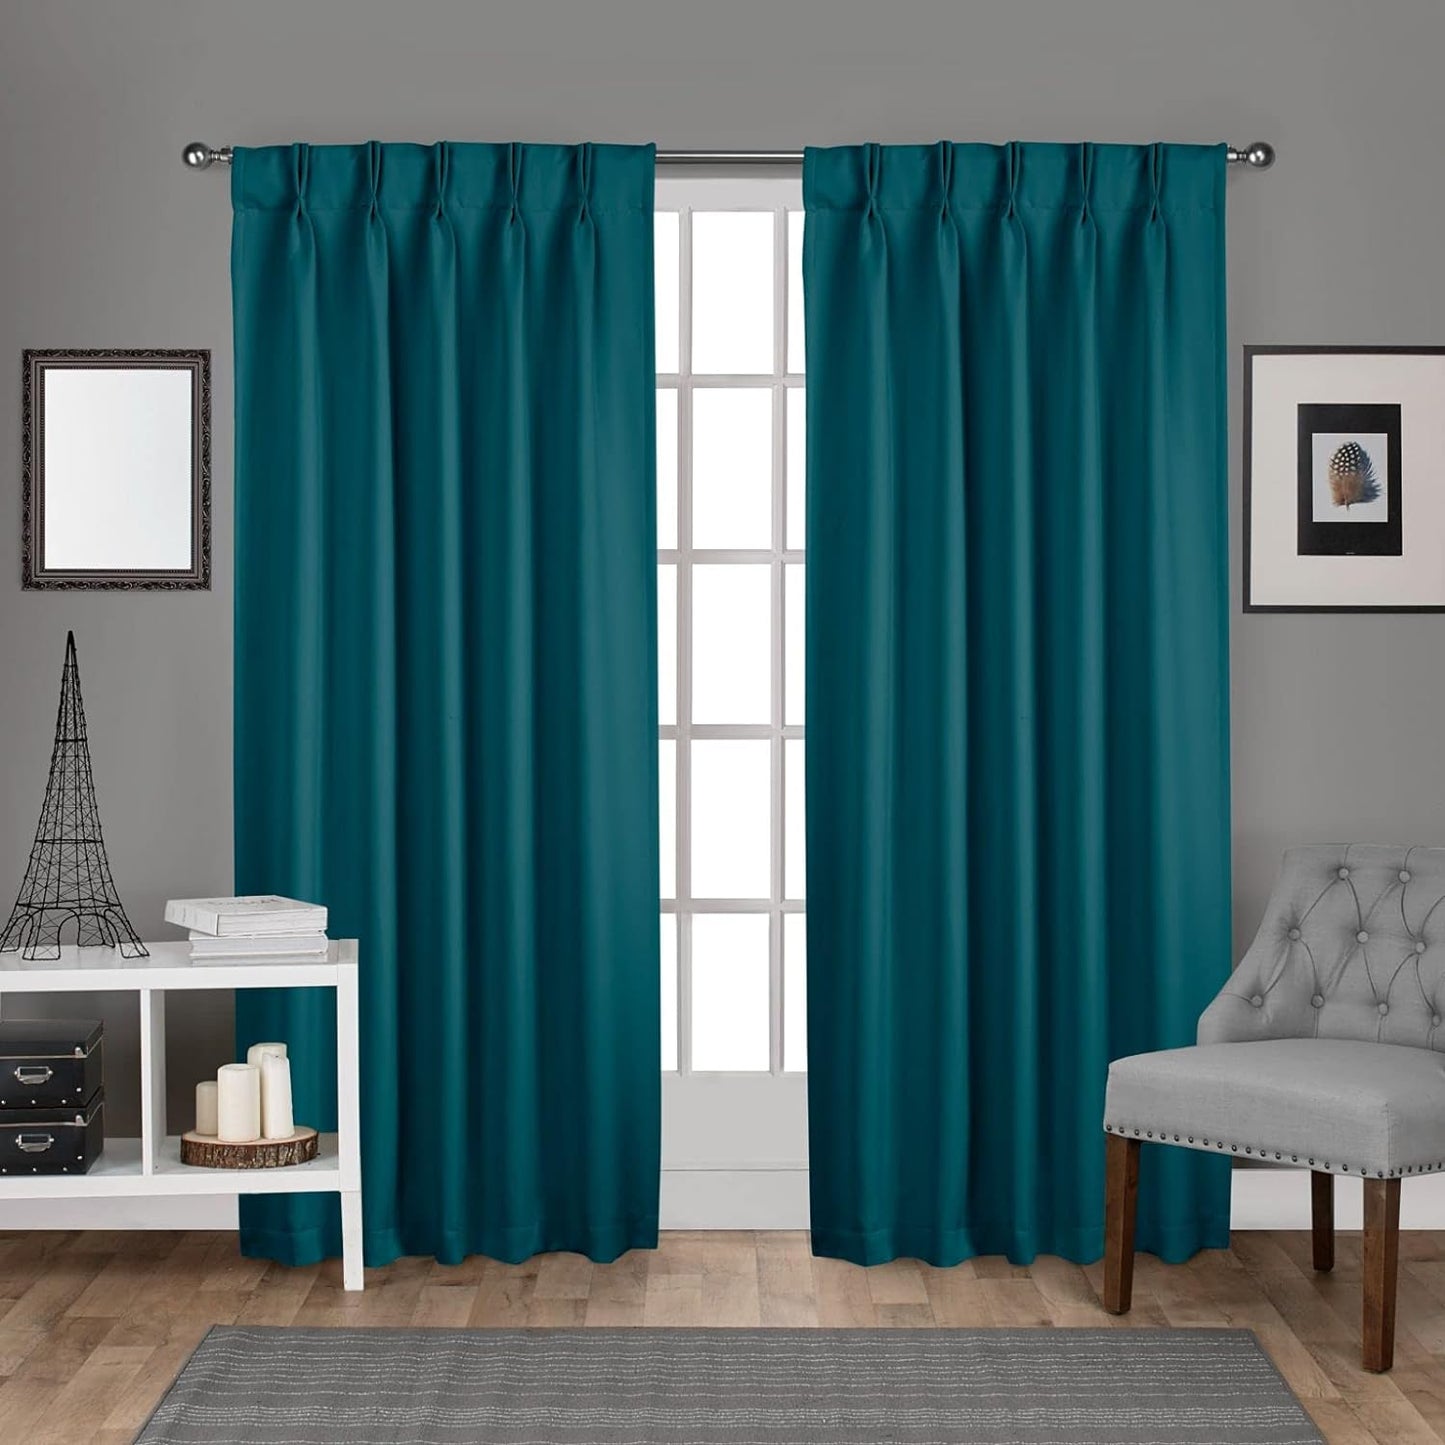 Exclusive Home Sateen Twill Woven Room Darkening Blackout Pinch Pleat/Hidden Tab Top Curtain Panel Pair, 108" Length, Vanilla  Exclusive Home Curtains Teal 84" Length 